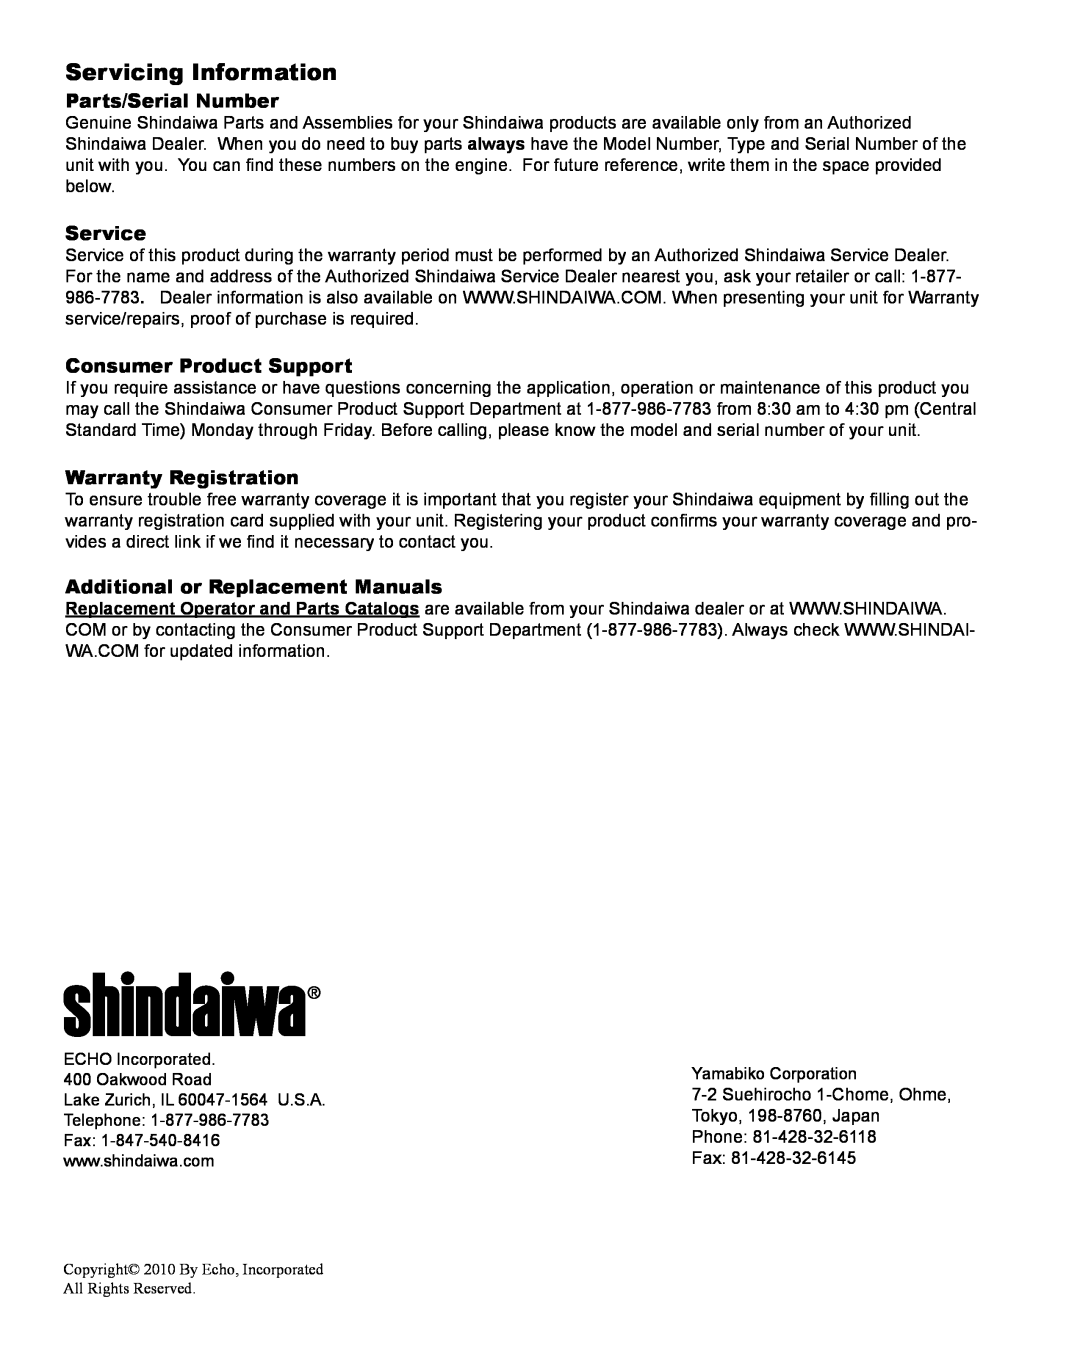 Shindaiwa X7502235300 Servicing Information, Parts/Serial Number, Service, Consumer Product Support, Warranty Registration 